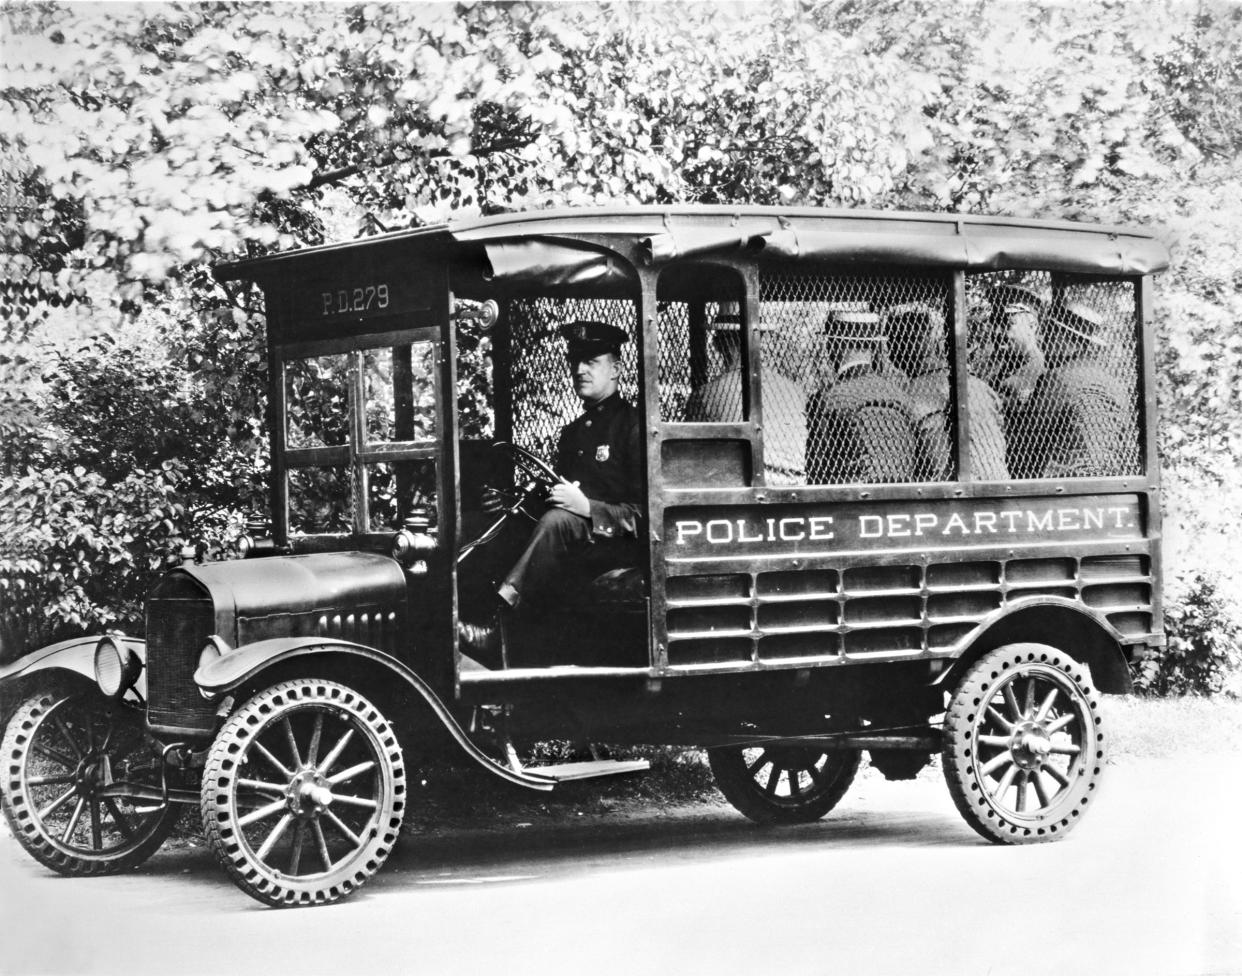 A 1925 Ford Model T used as a police transport wagon.